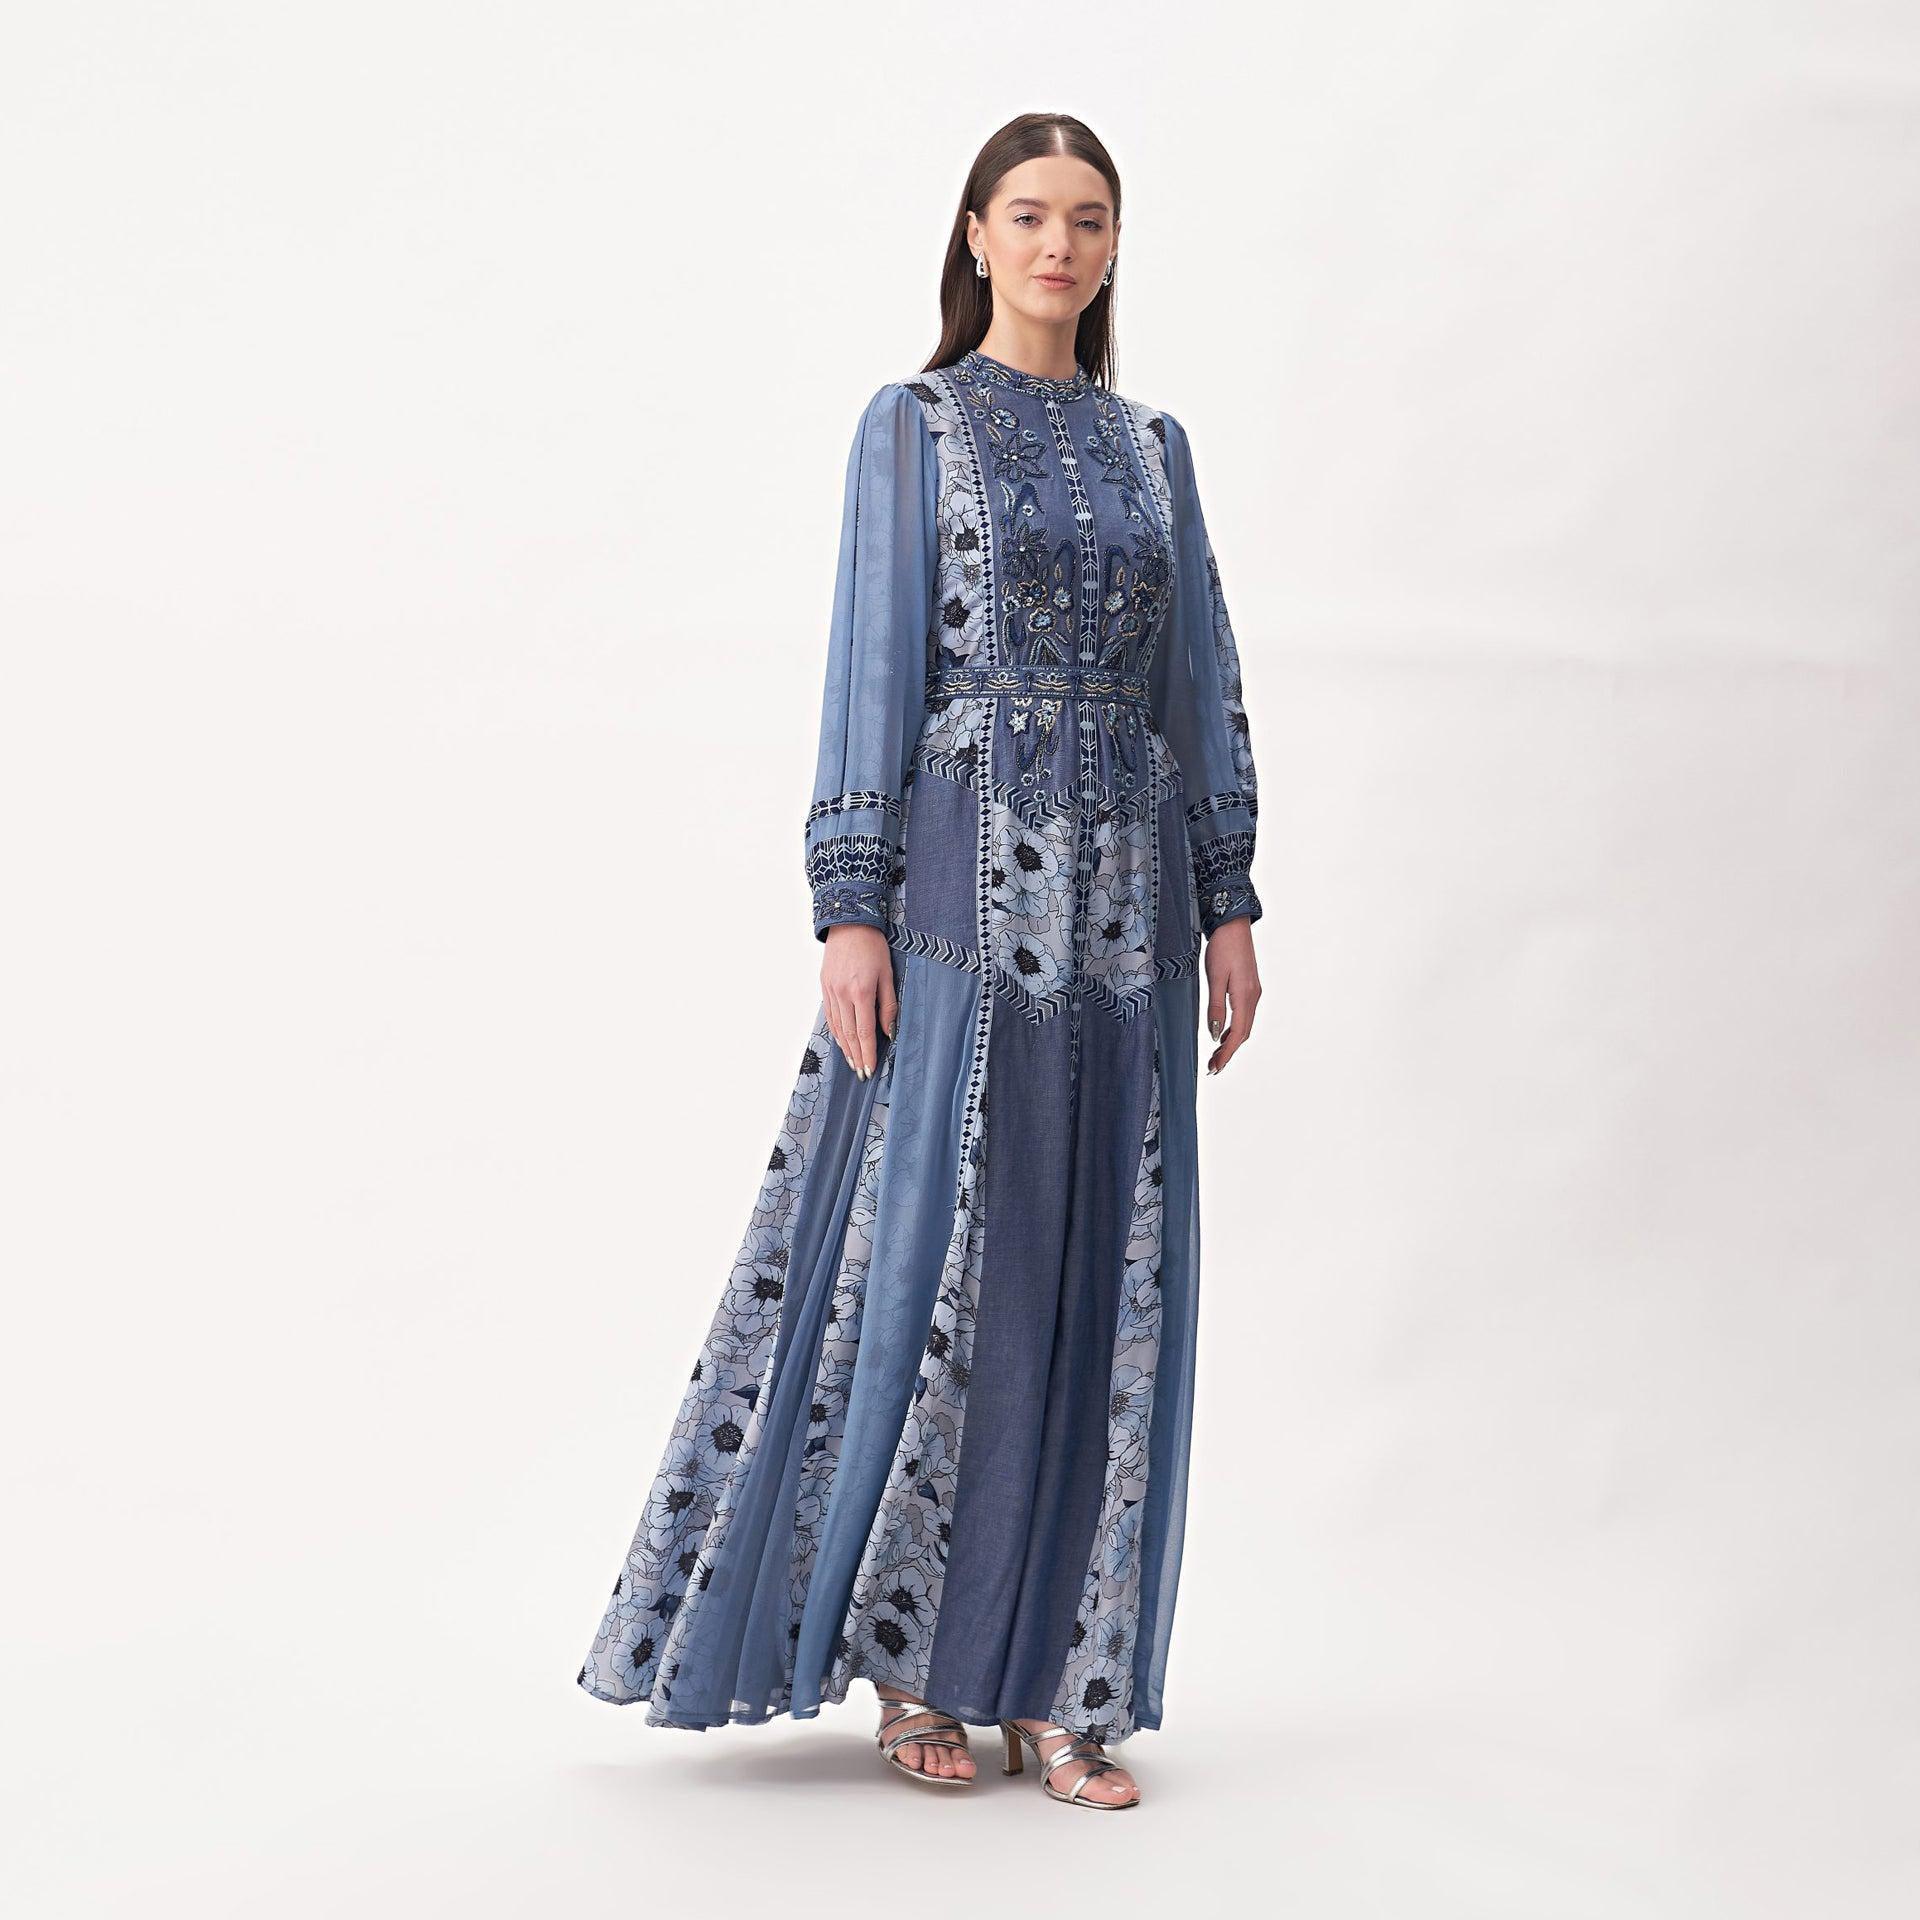 Blue Embroidery Dress with Chiffon Long Sleeves From Shalky - WECRE8